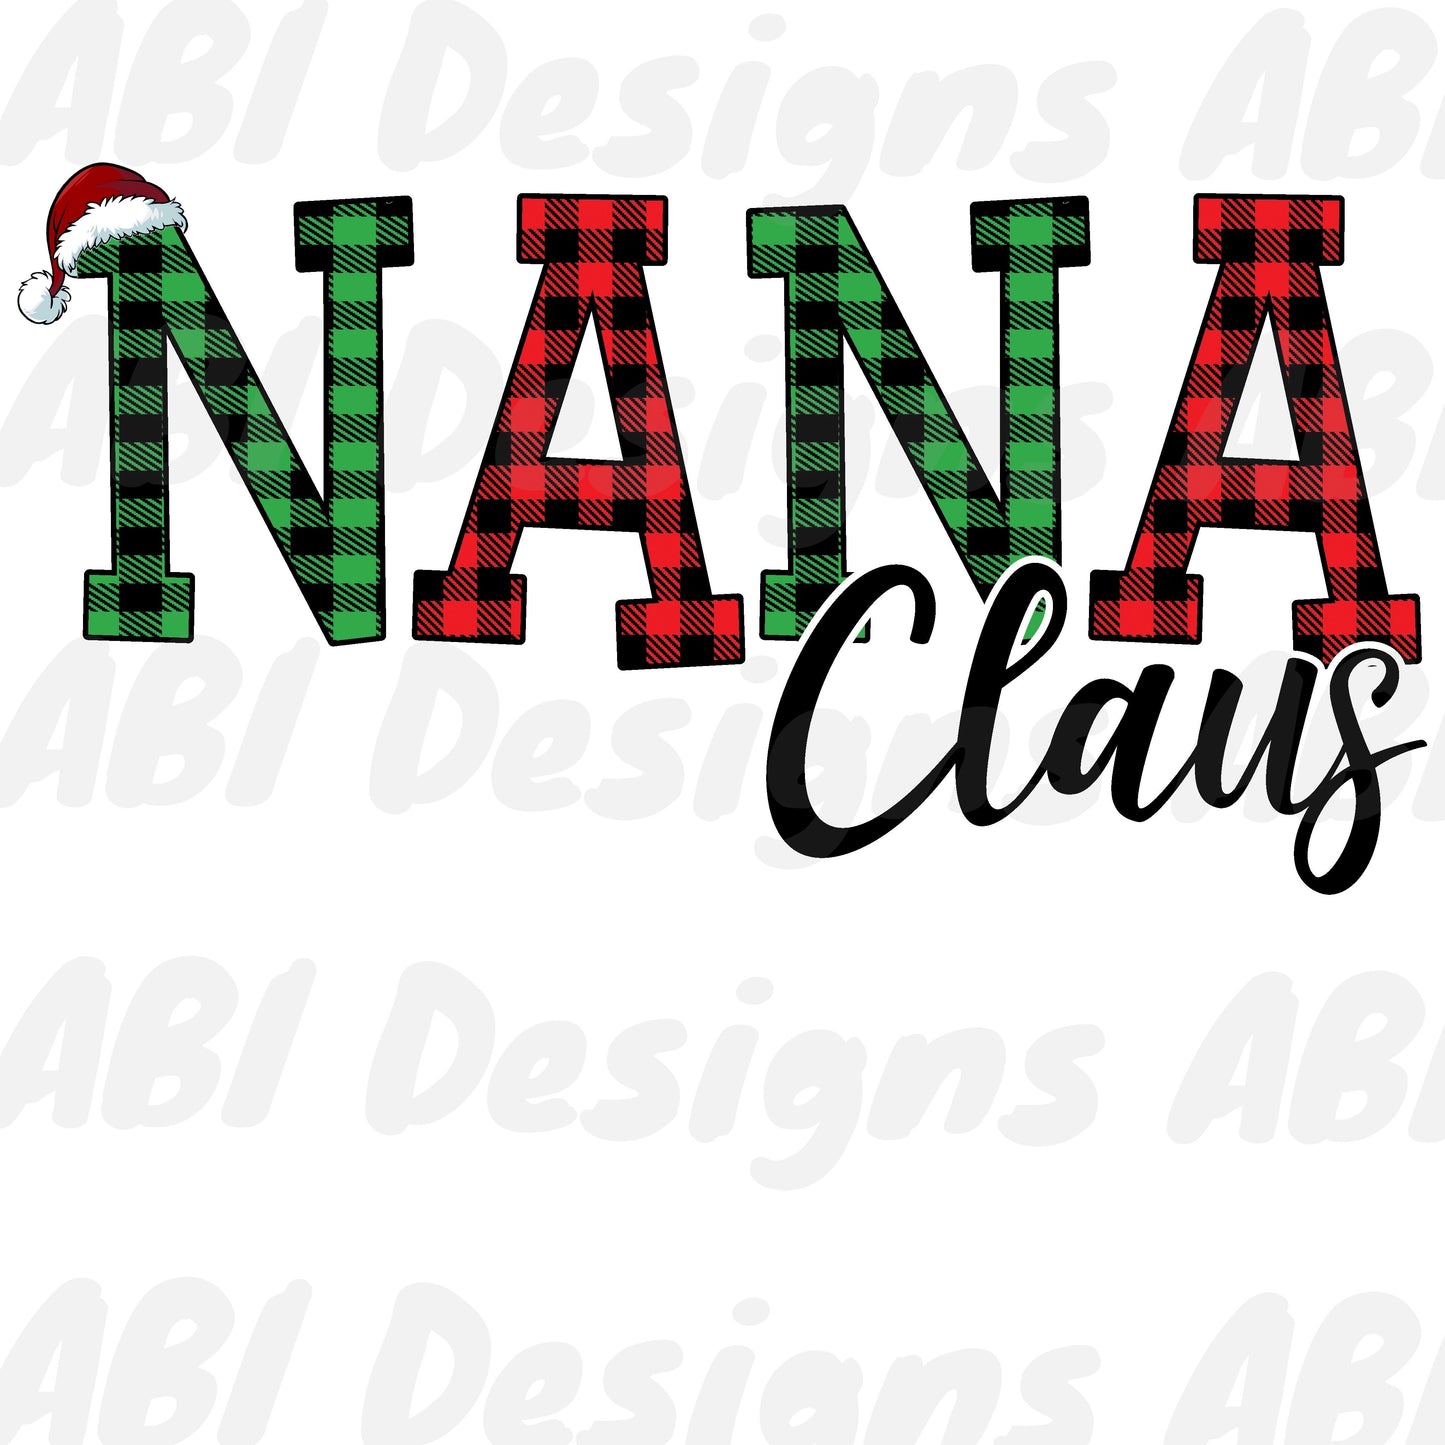 Nana claus red and green - Sublimation